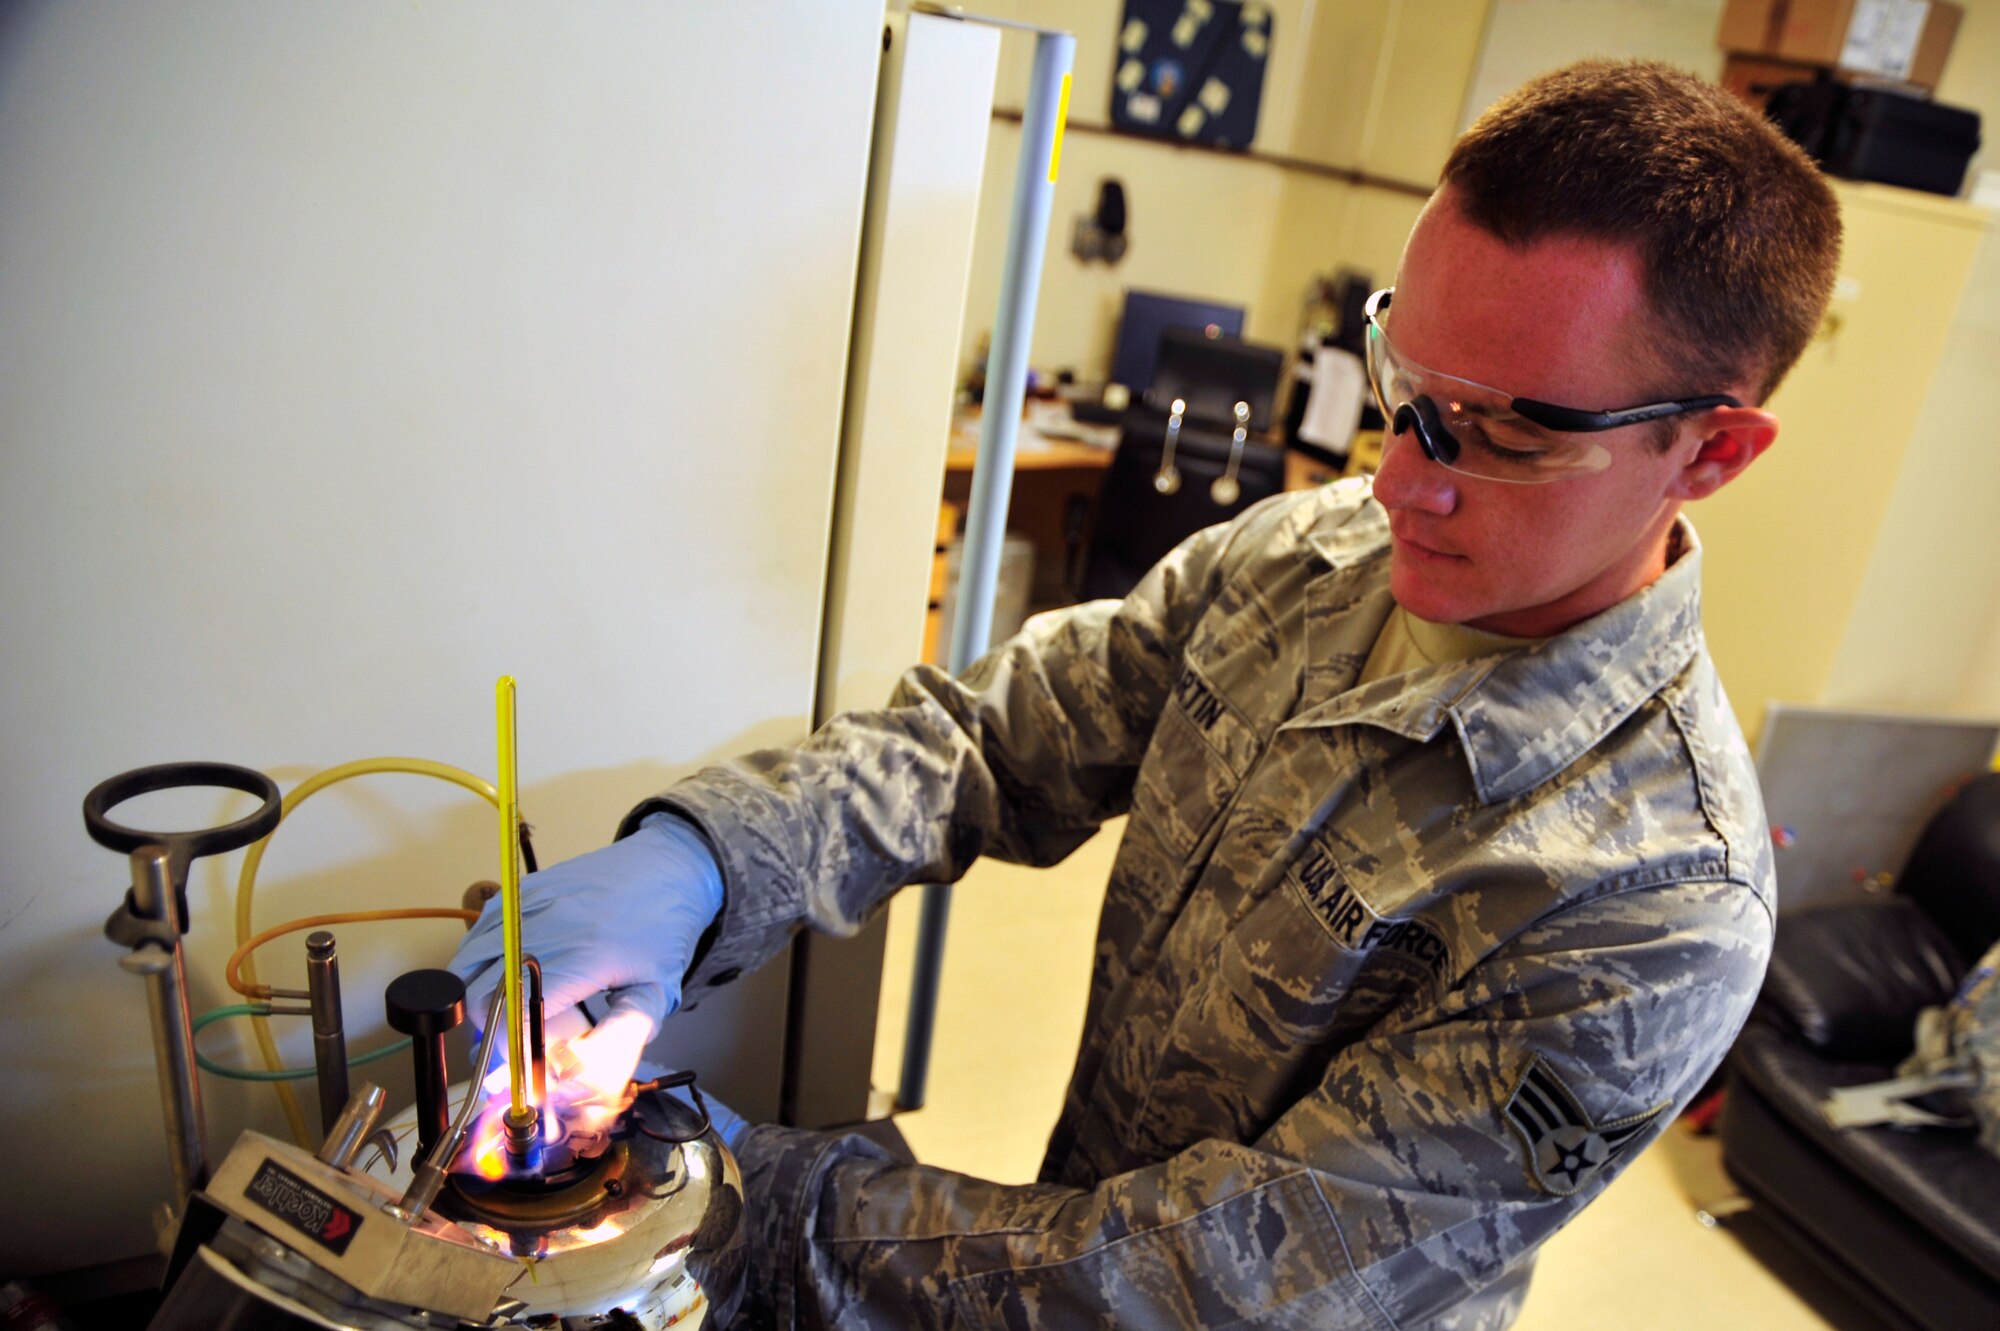 SOUTHWEST ASIA -Senior Airman Levi Martin, 380th Expeditionary Logistics Readiness Squadron fuel laboratory technician, ignites a pilot light on a flash point tester Nov. 10, 2009. Airman Martin is deployed from Dover Air Force Base, Del., and grew up in Crestview, Fla. (U.S. Air Force photo/Tech.Sgt. Charles Larkin Sr)
